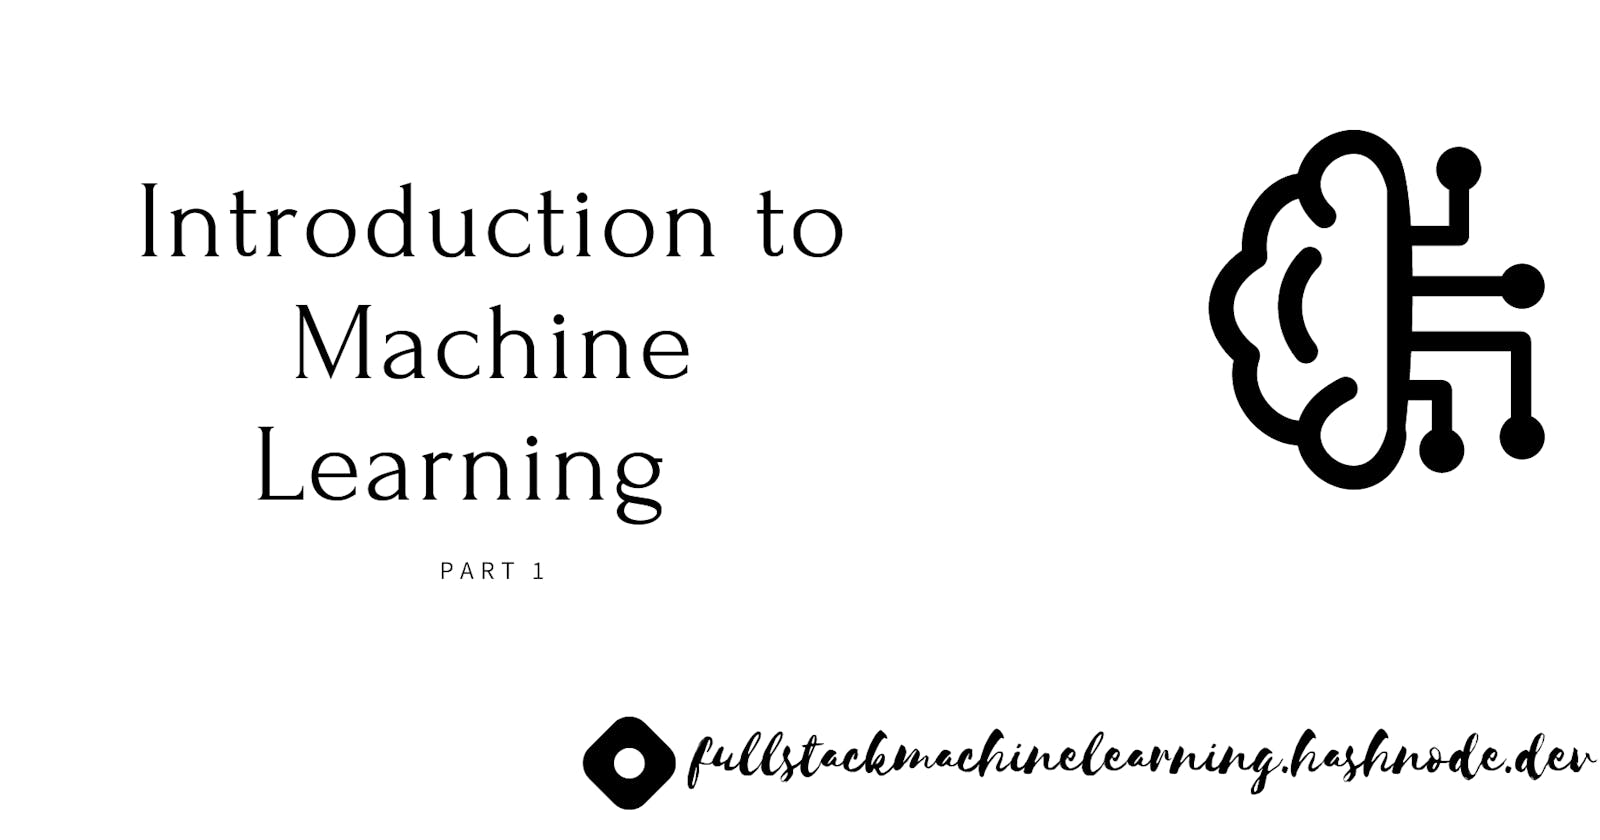 Introduction to Machine Learning Part 1